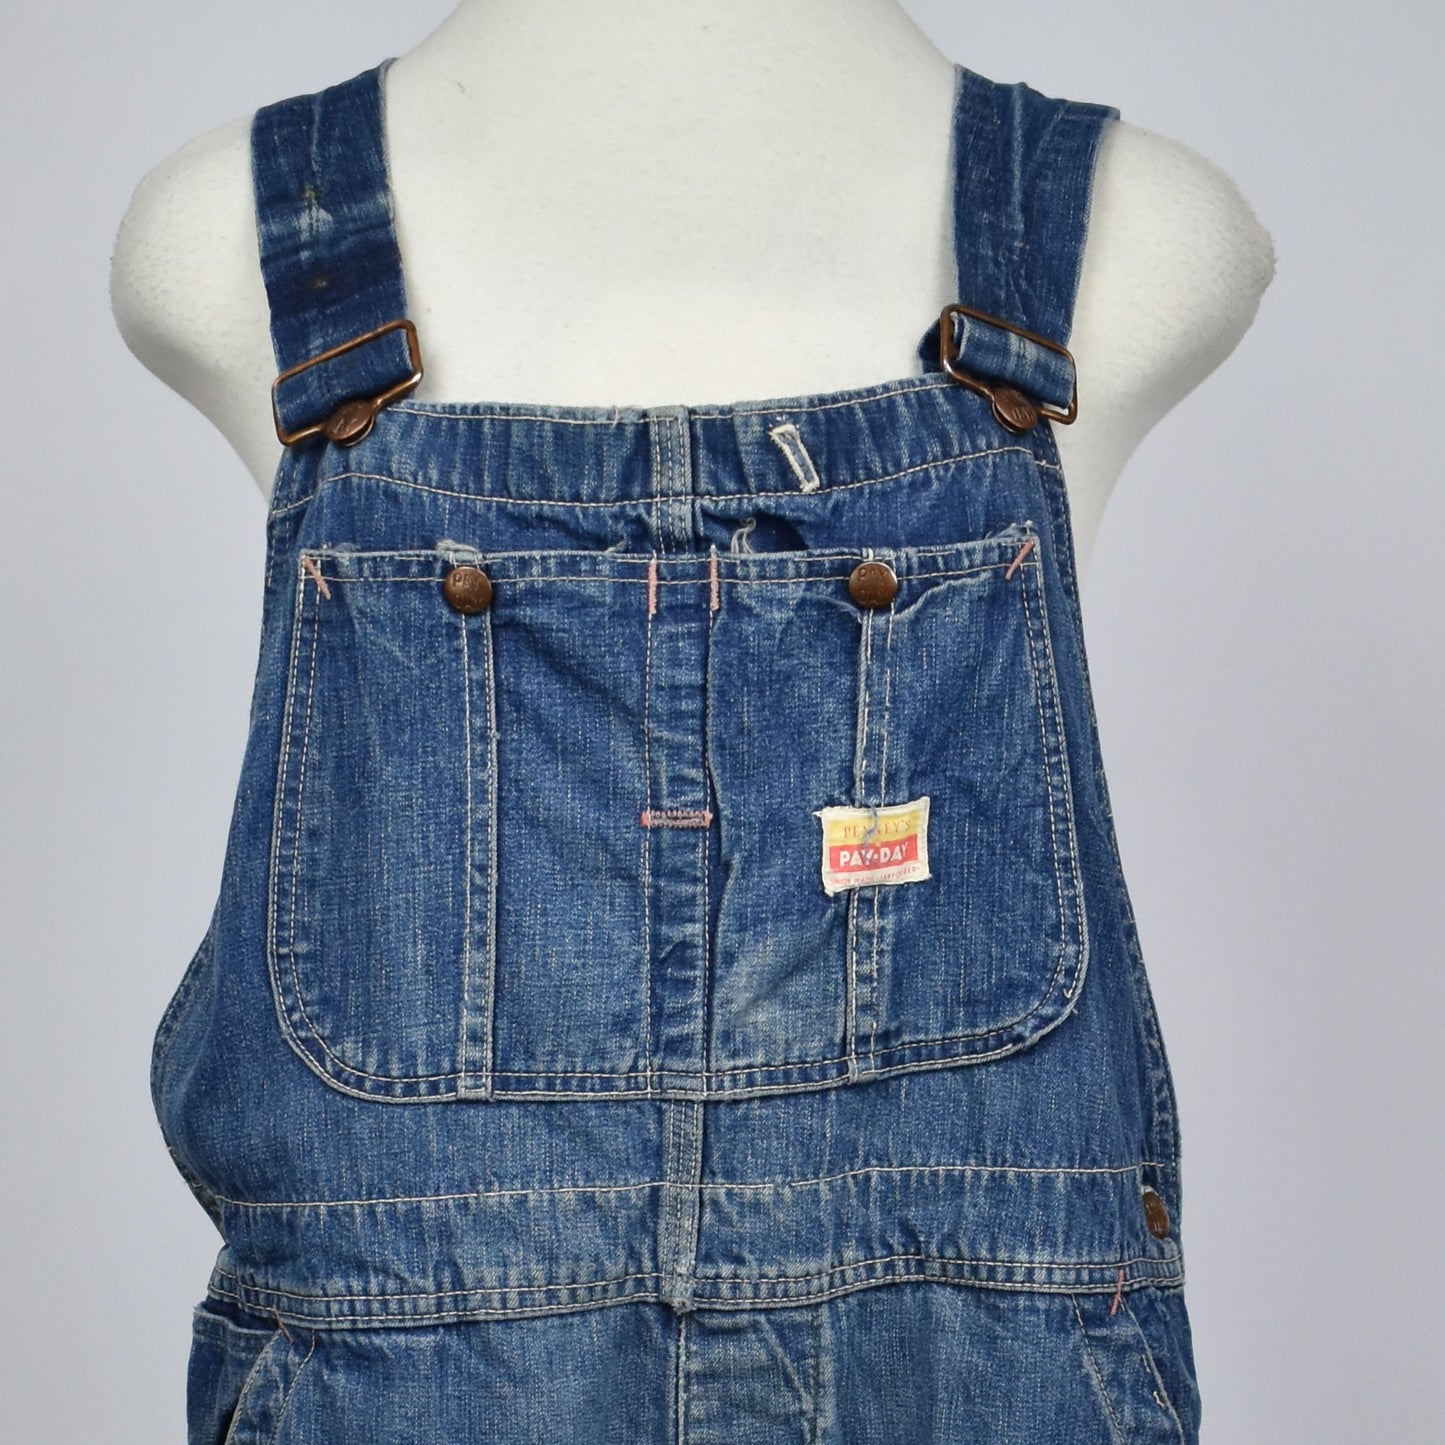 Vintage 50s Jc Penney's Donut Button PAY DAY Indigo Denim Overall Work Wear Pants